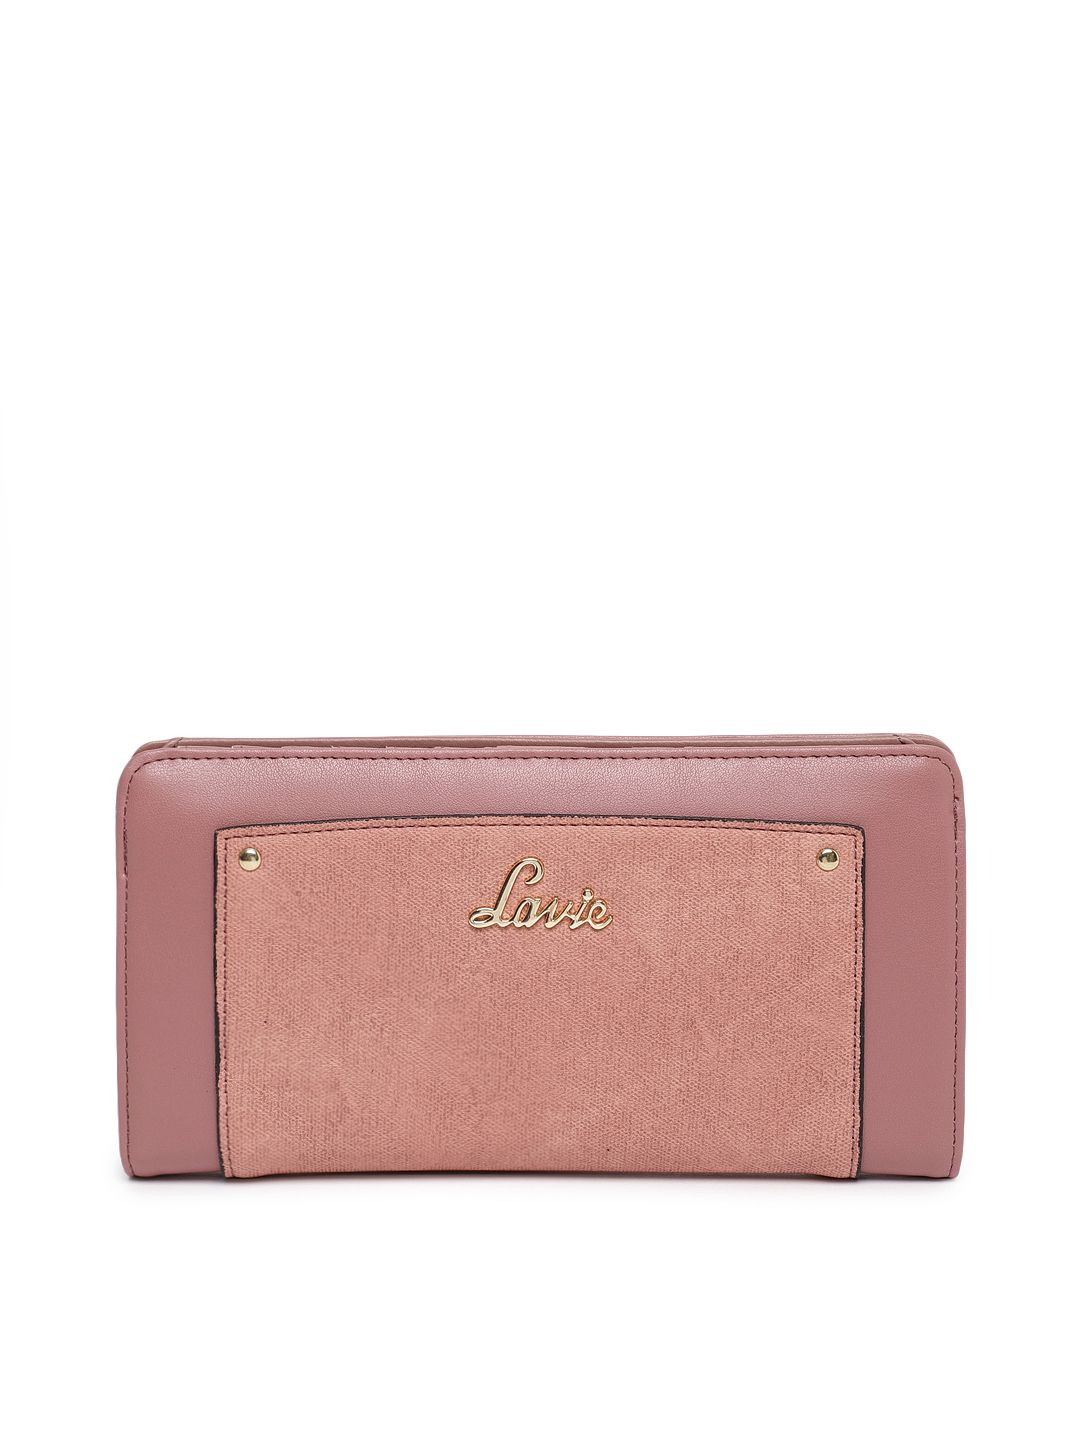 Lavie Women Peach-Coloured & Pink Colourblocked Two Fold Wallet Price in India